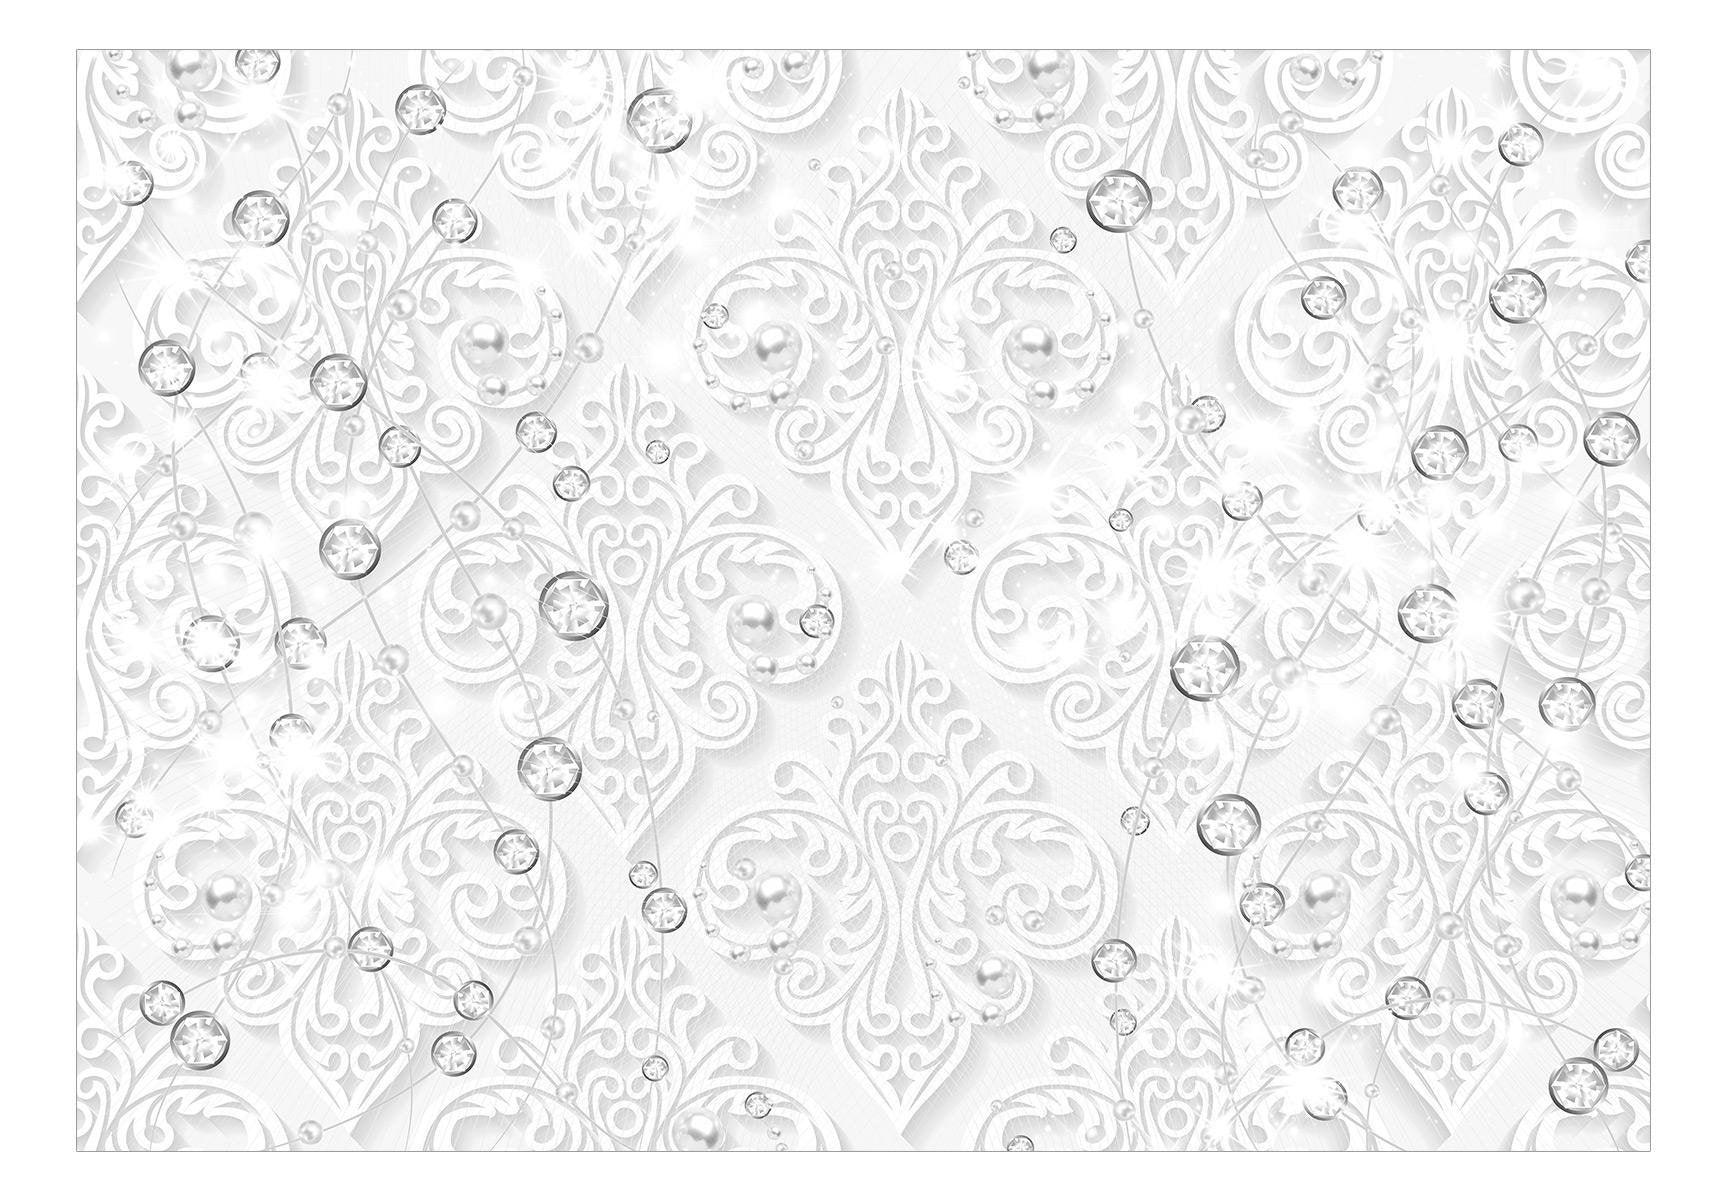 Peel and stick wall mural - Ornaments with Diamonds - www.trendingbestsellers.com